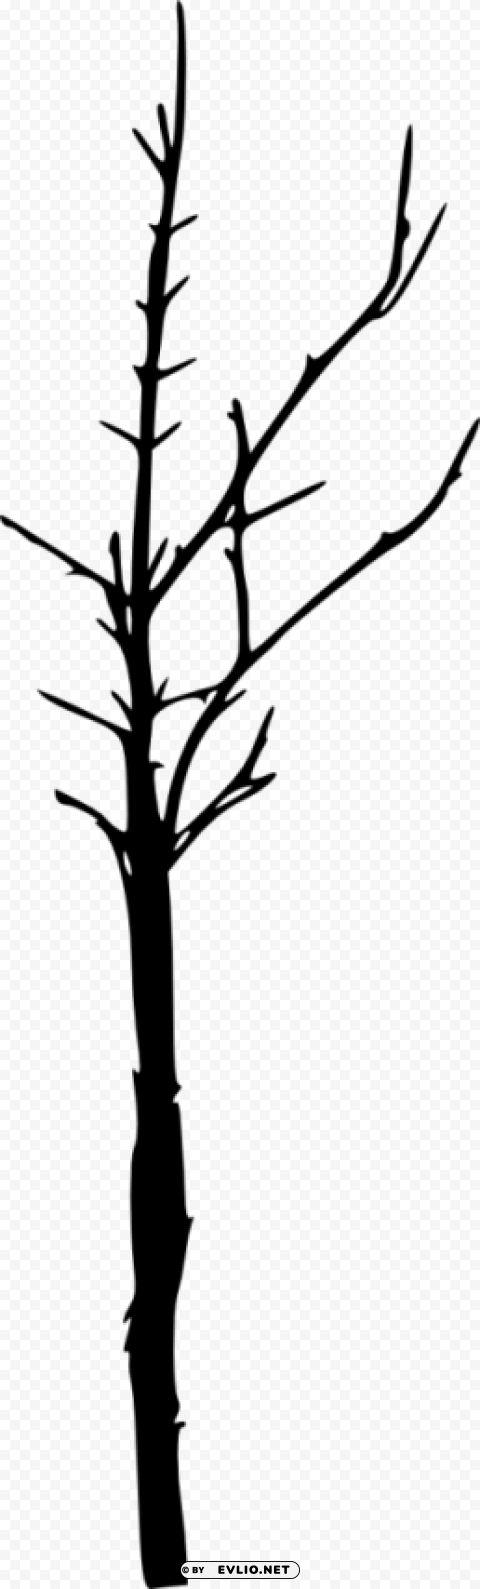 bare tree silhouette Isolated Design Element in Clear Transparent PNG